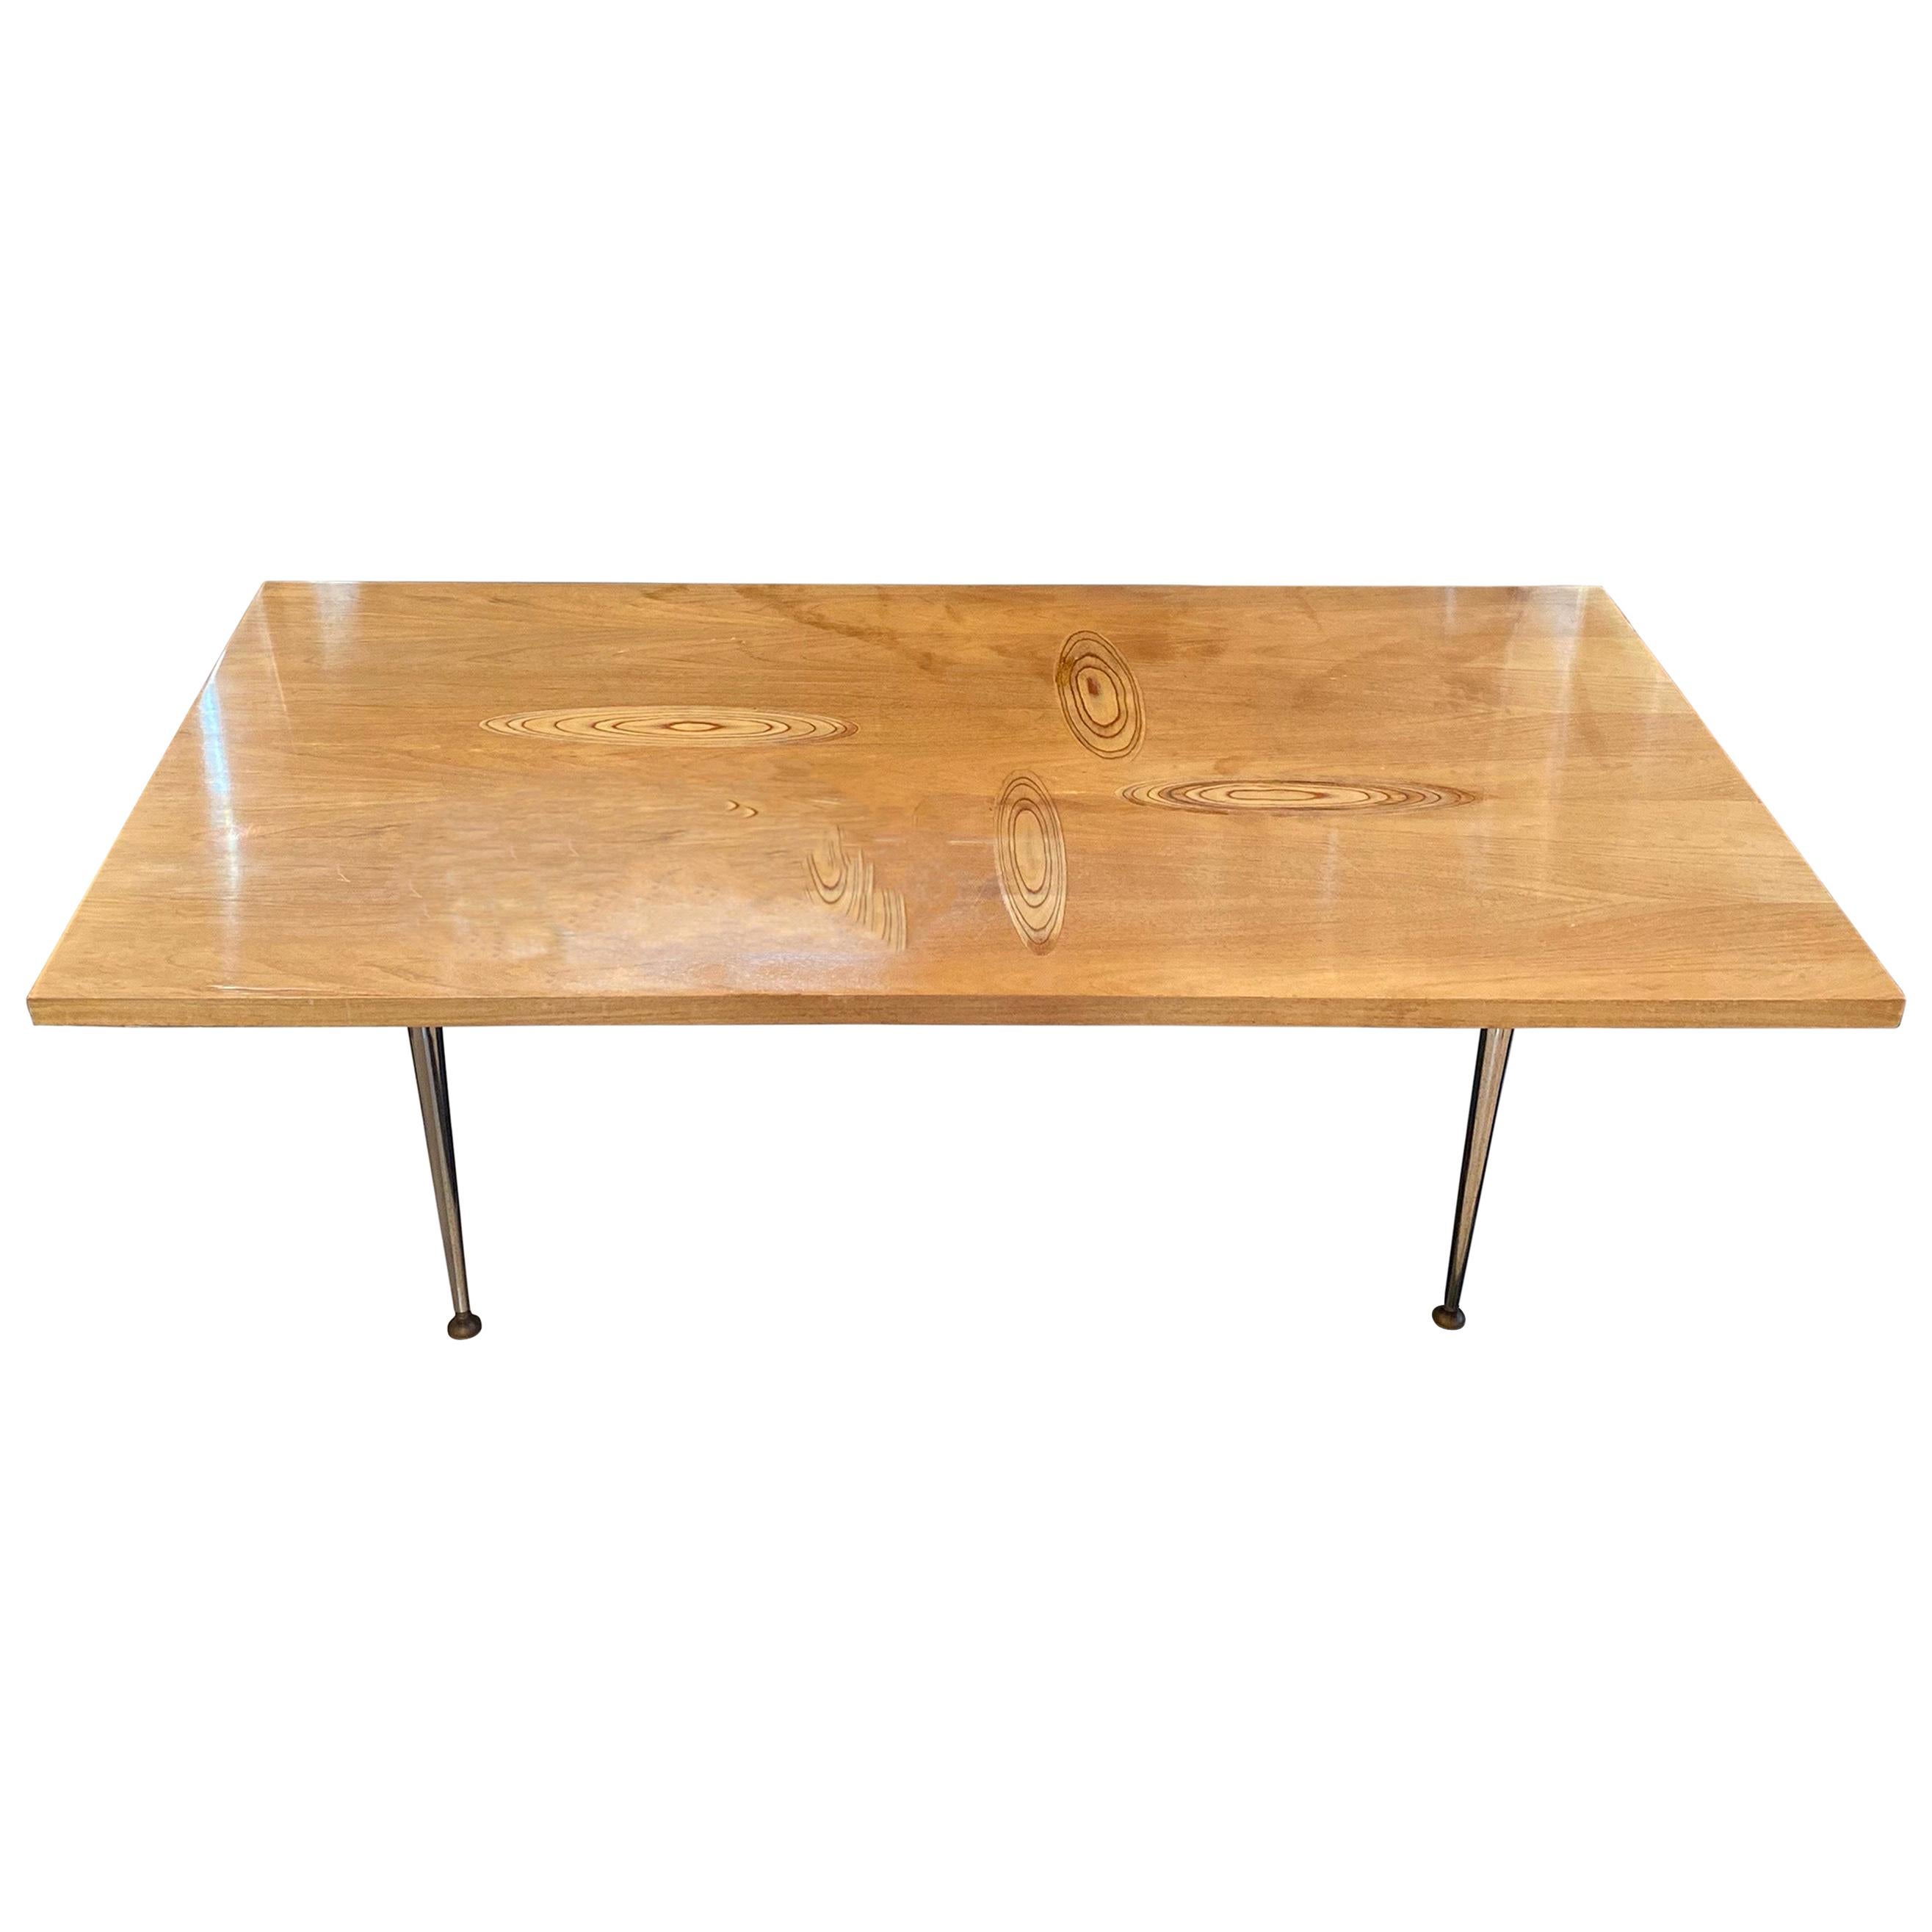 Tapio for Asko Midcentury wood Coffee Table with Swirls and Metal Legs